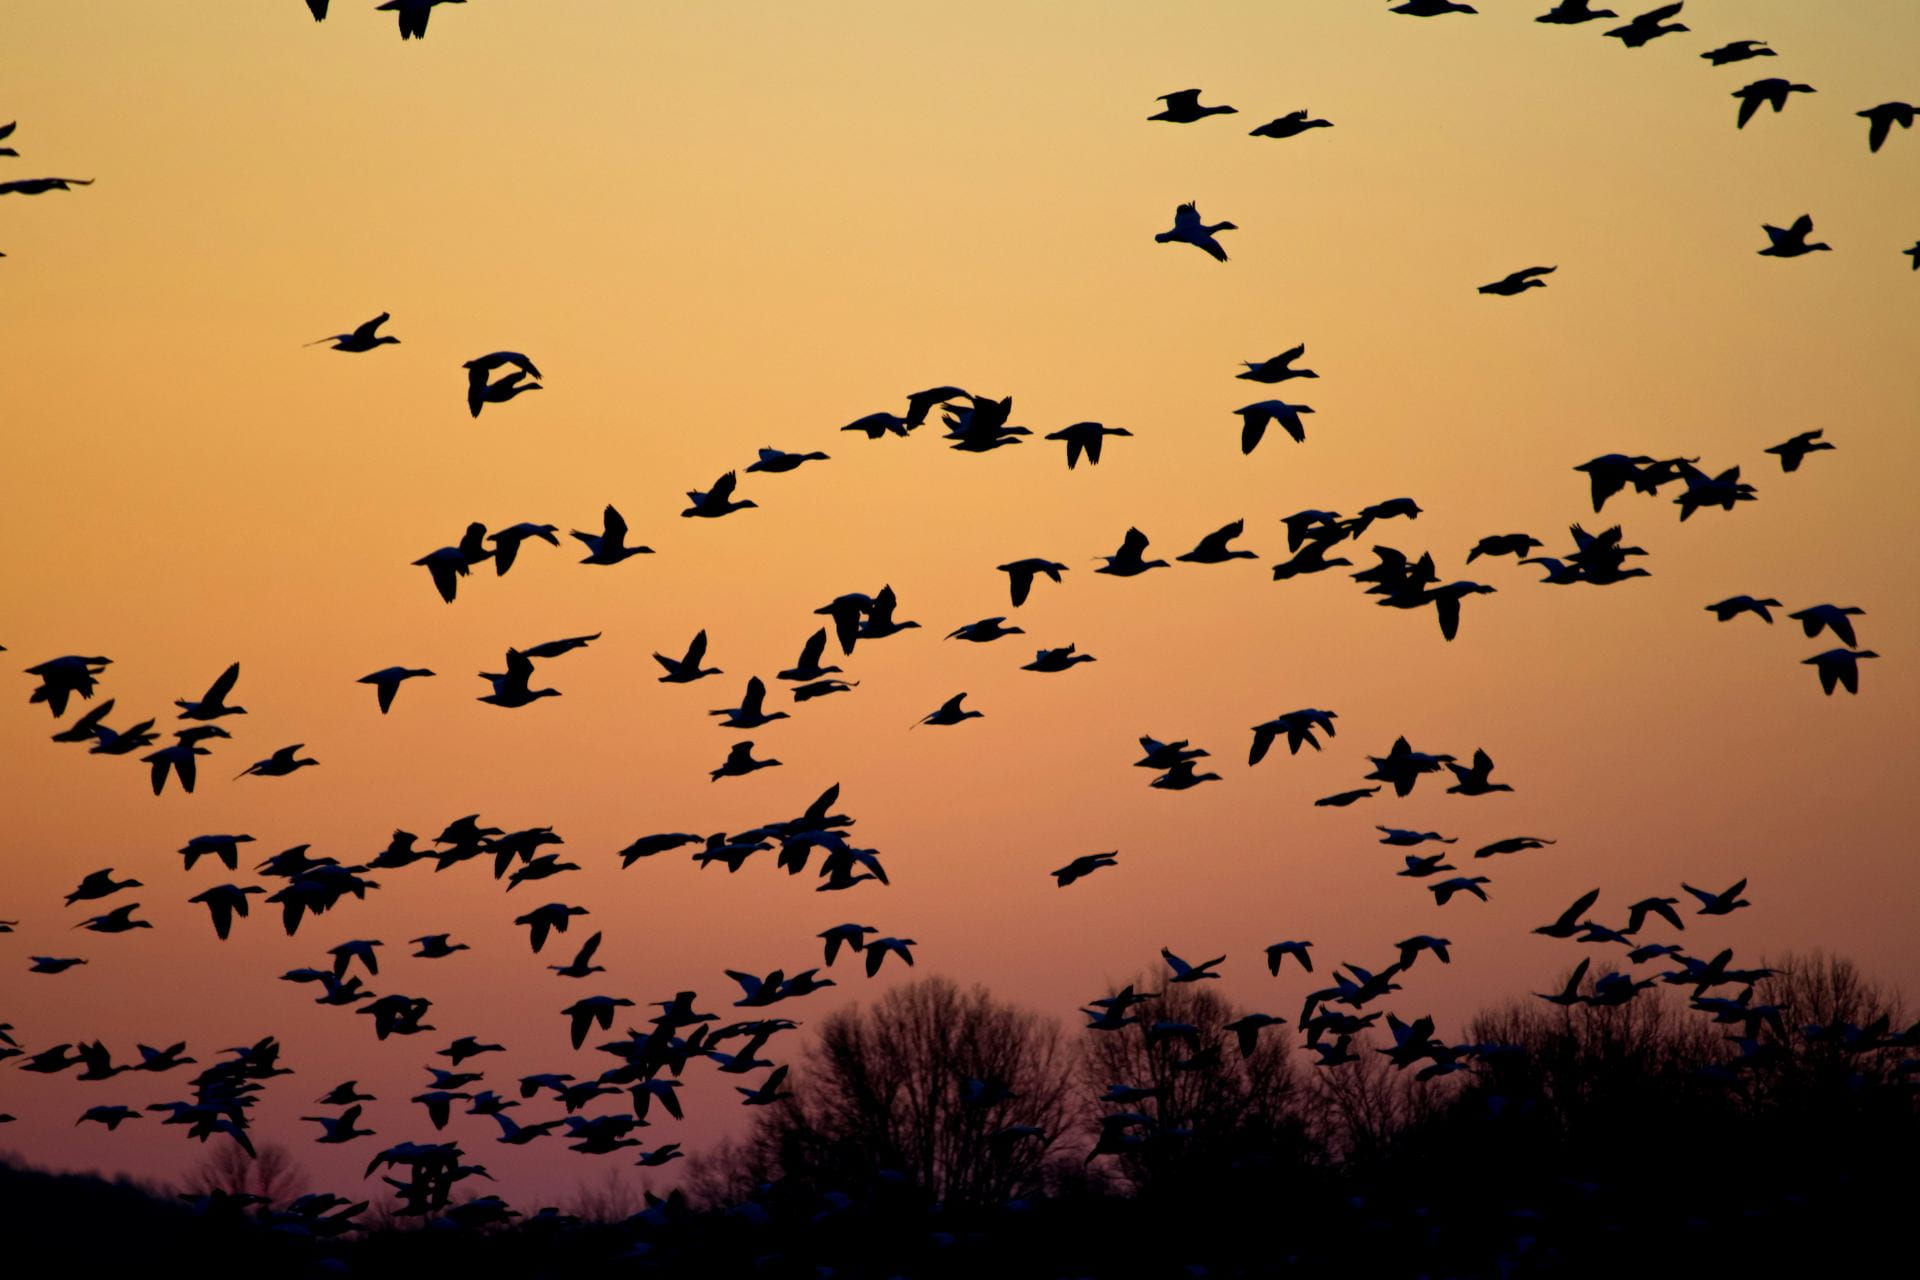 Image of mass group of birds flying through the sunset sky